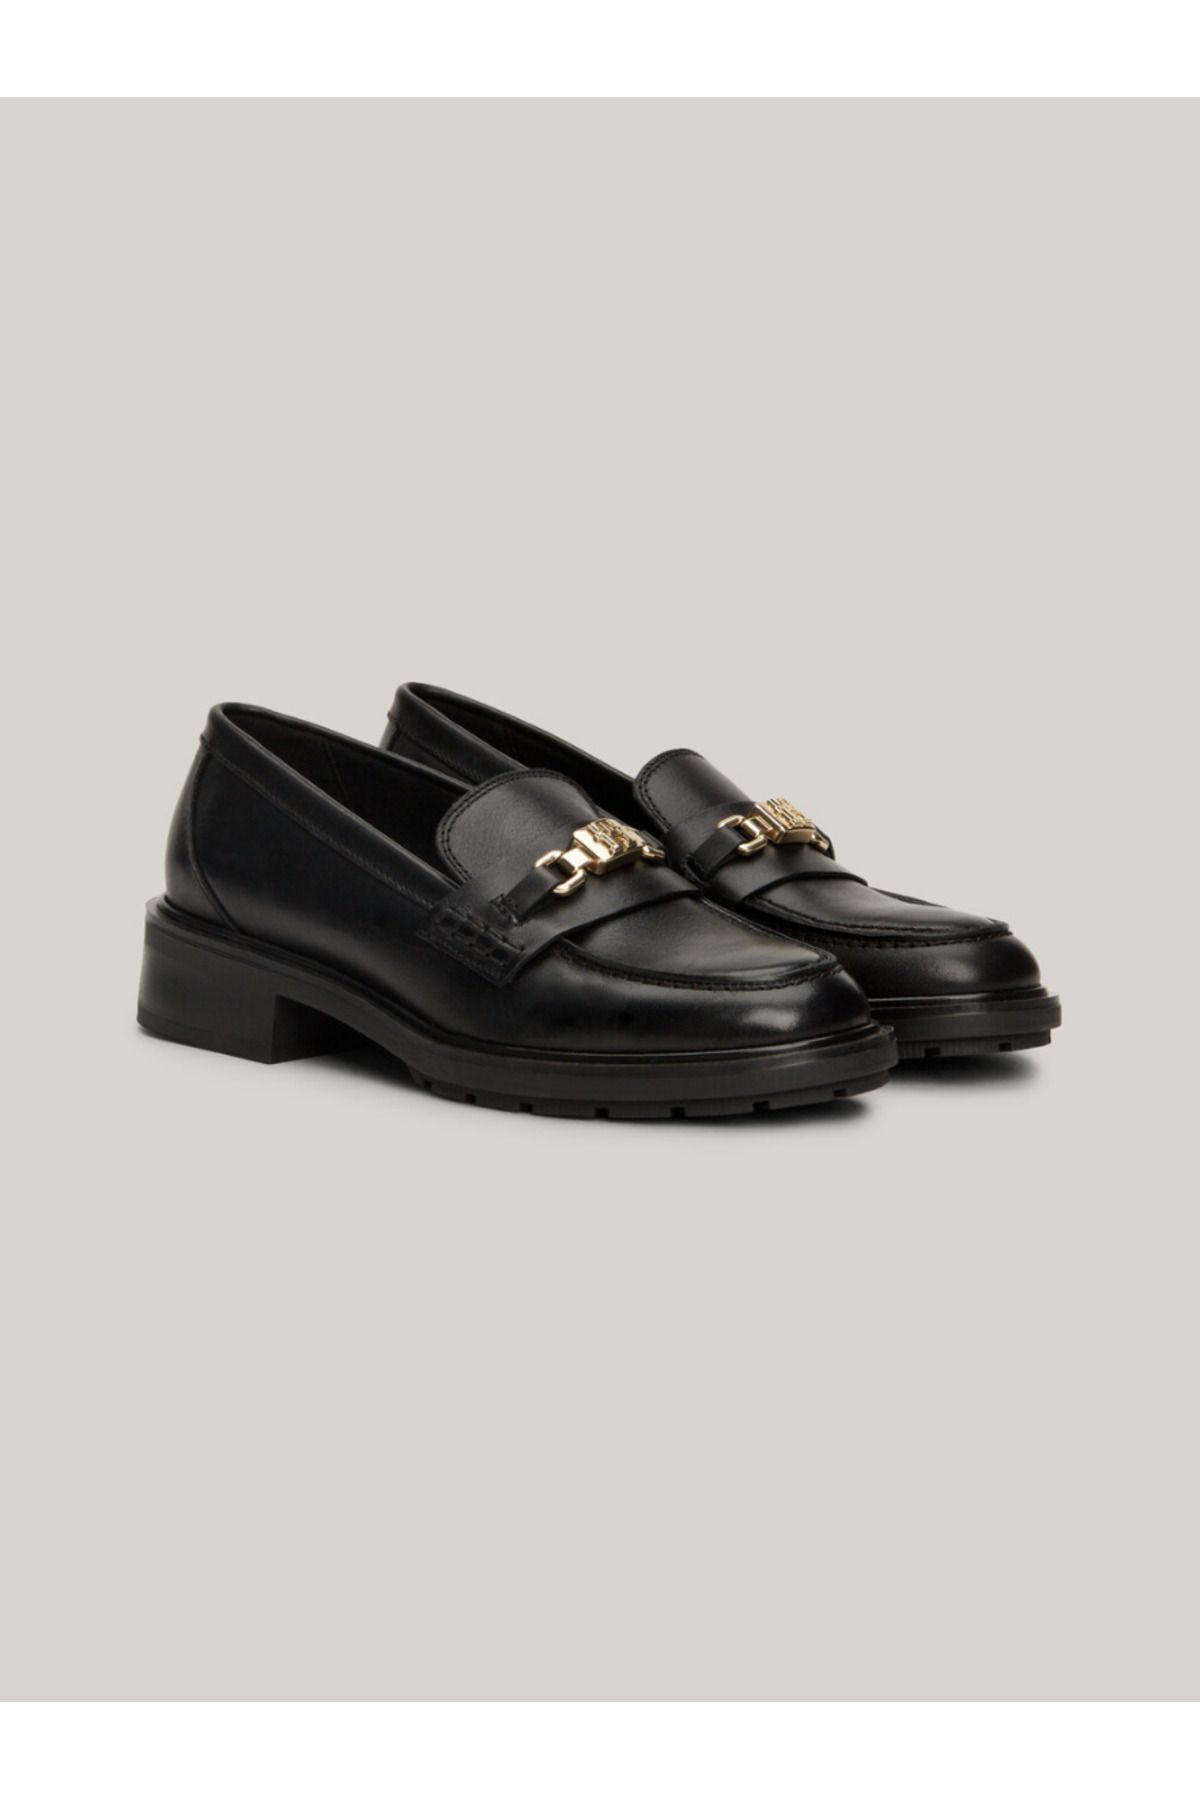 Tommy Hilfiger TH Monogram Leather Loafers